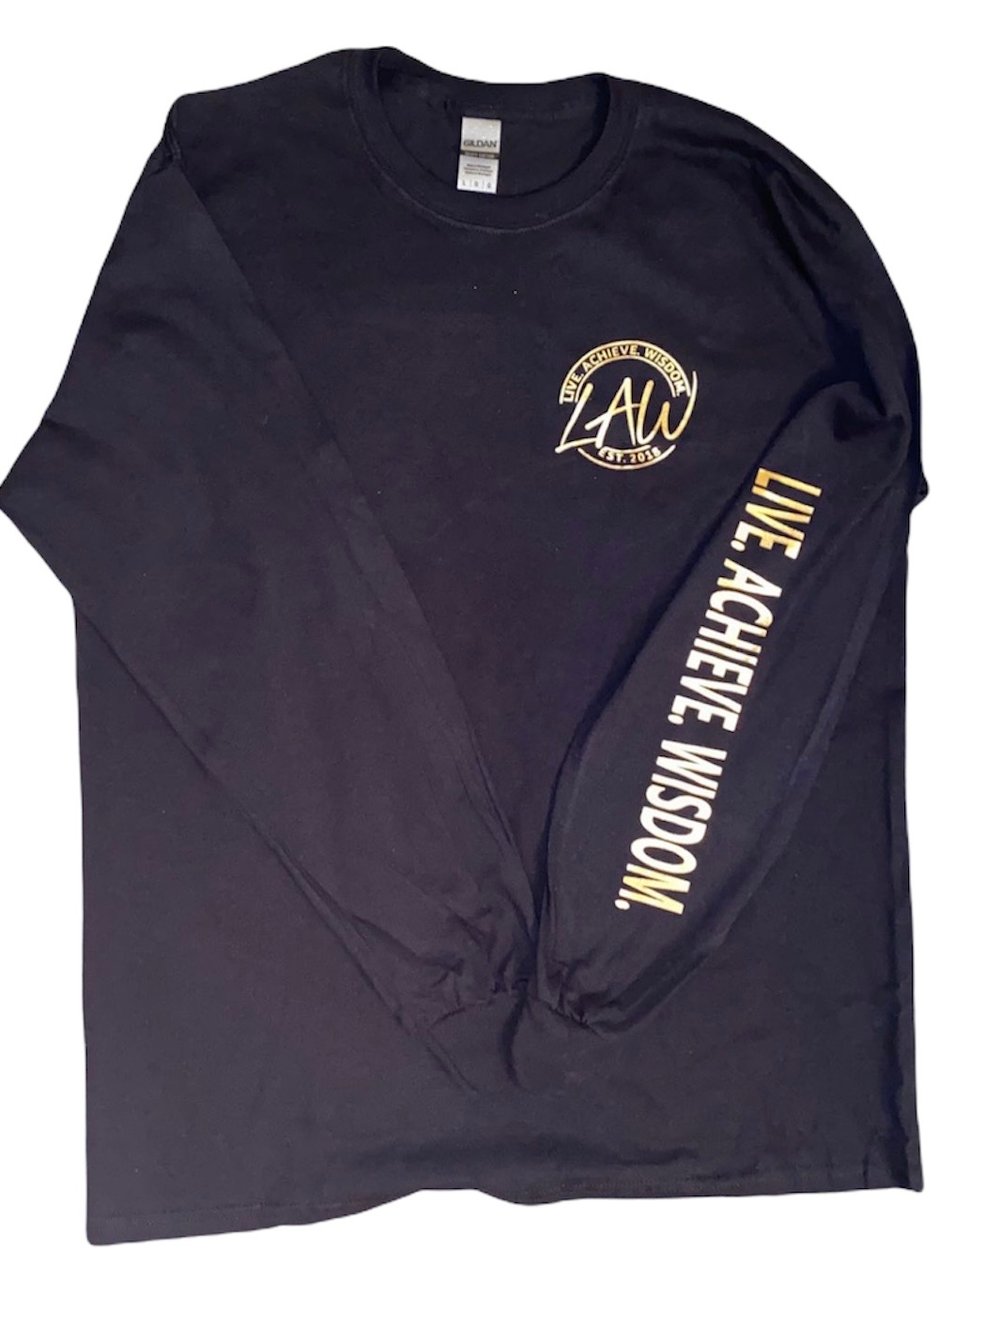 Image of LAW LONG SLEEVE